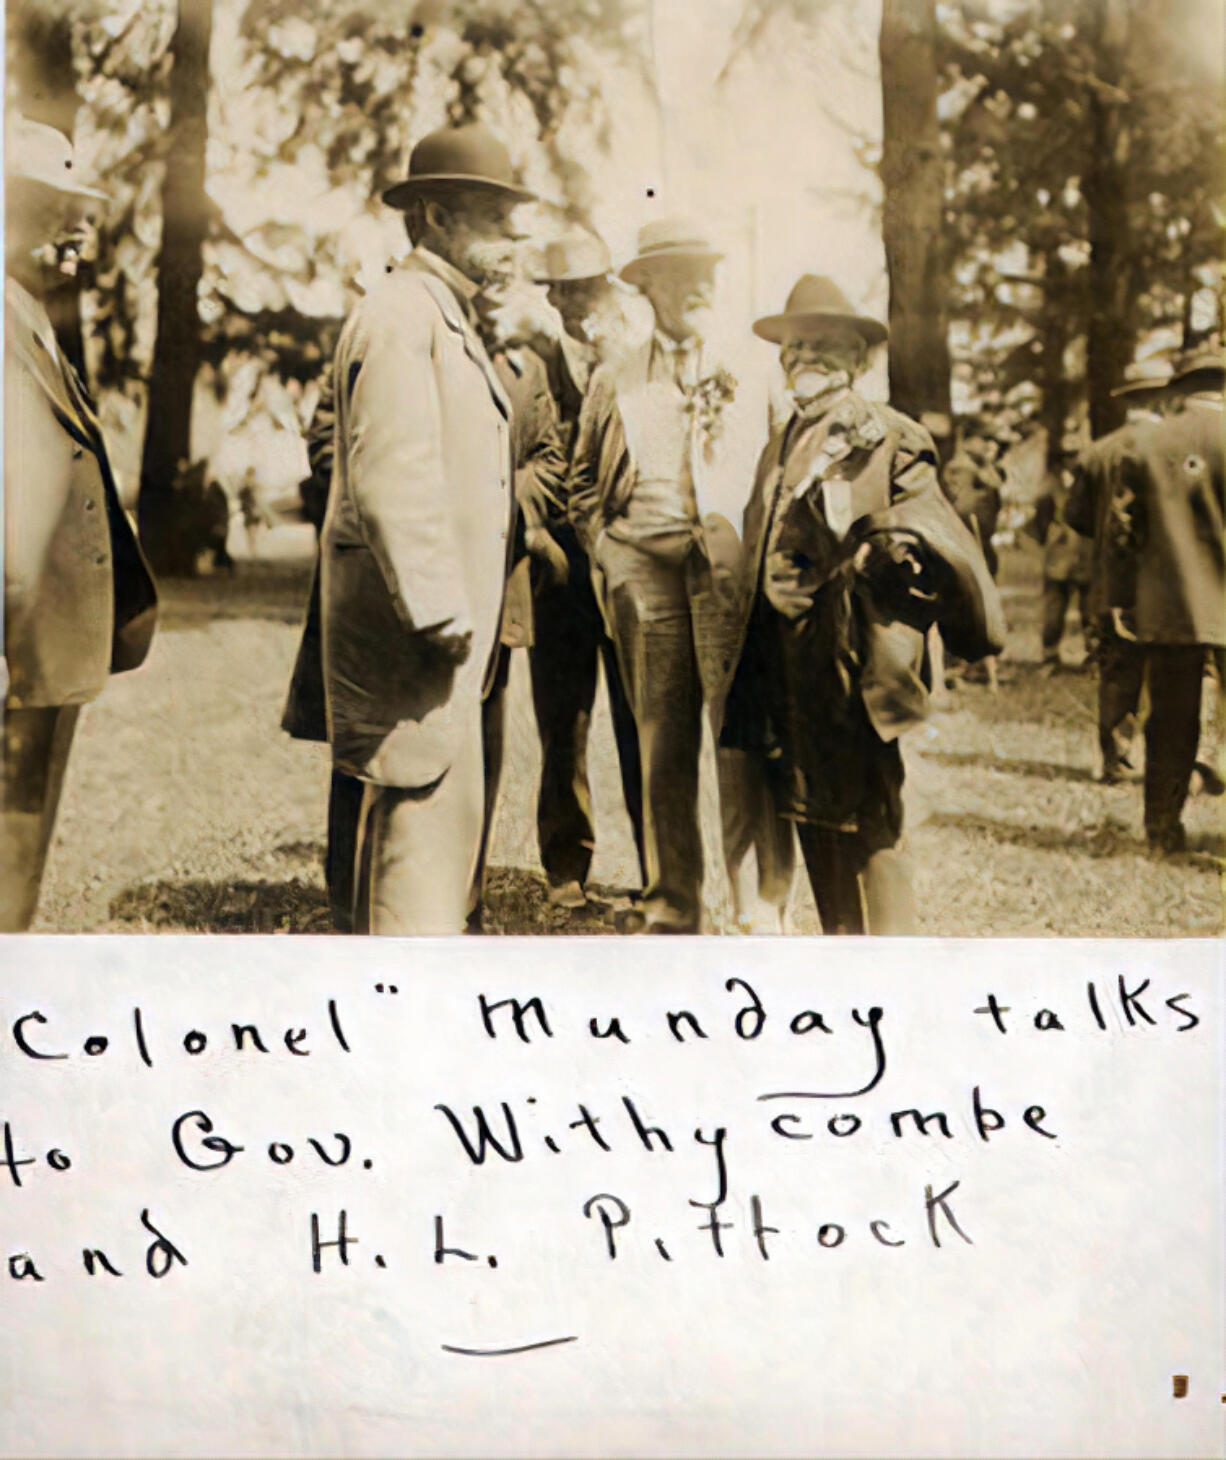 James A. Munday, a Civil War Confederate cavalryman and prisoner of war, was a short man who had a big effect on Clark County. He championed better roads, the Interstate Bridge, and the construction of a port along the Columbia River. In this photo, "Colonel" Munday, right, speaks with Oregon Gov. James Withycombe, left, and Henry Pittock, center, Oregonian publisher, at the Dalles-Celilo Canal Opening Celebration in May 1915.